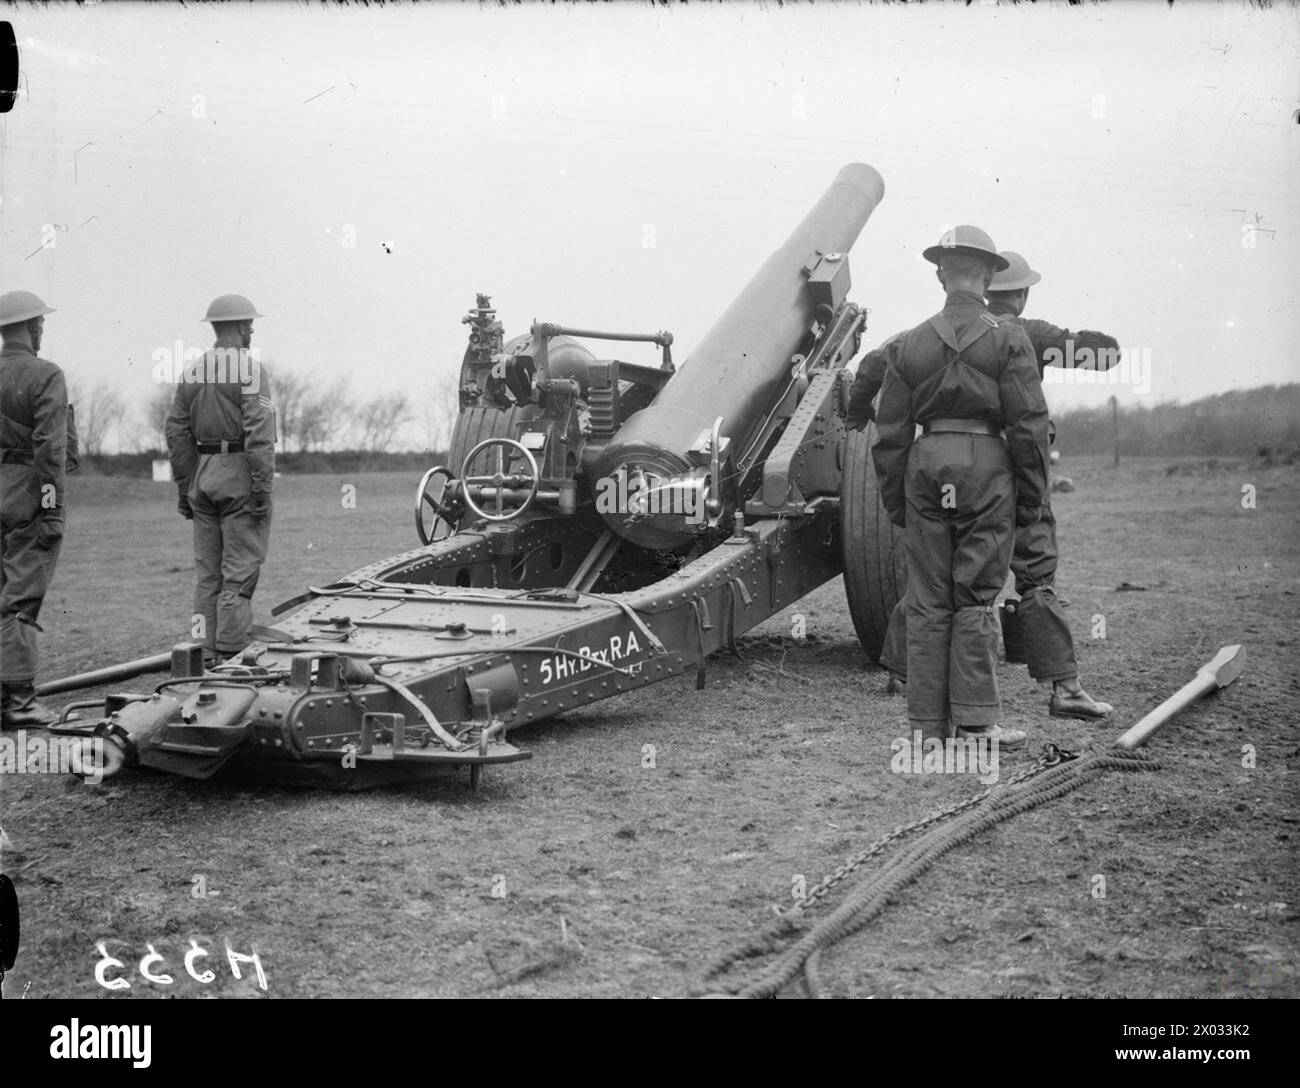 THE BRITISH ARMY IN THE UNITED KINGDOM 1939-45 - 9.2-inch howitzer and gun crew of the 5th Heavy Battery, Royal Artillery, at the School of Artillery at Larkhill, Wiltshire, November 1939  British Army, Royal Artillery Stock Photo